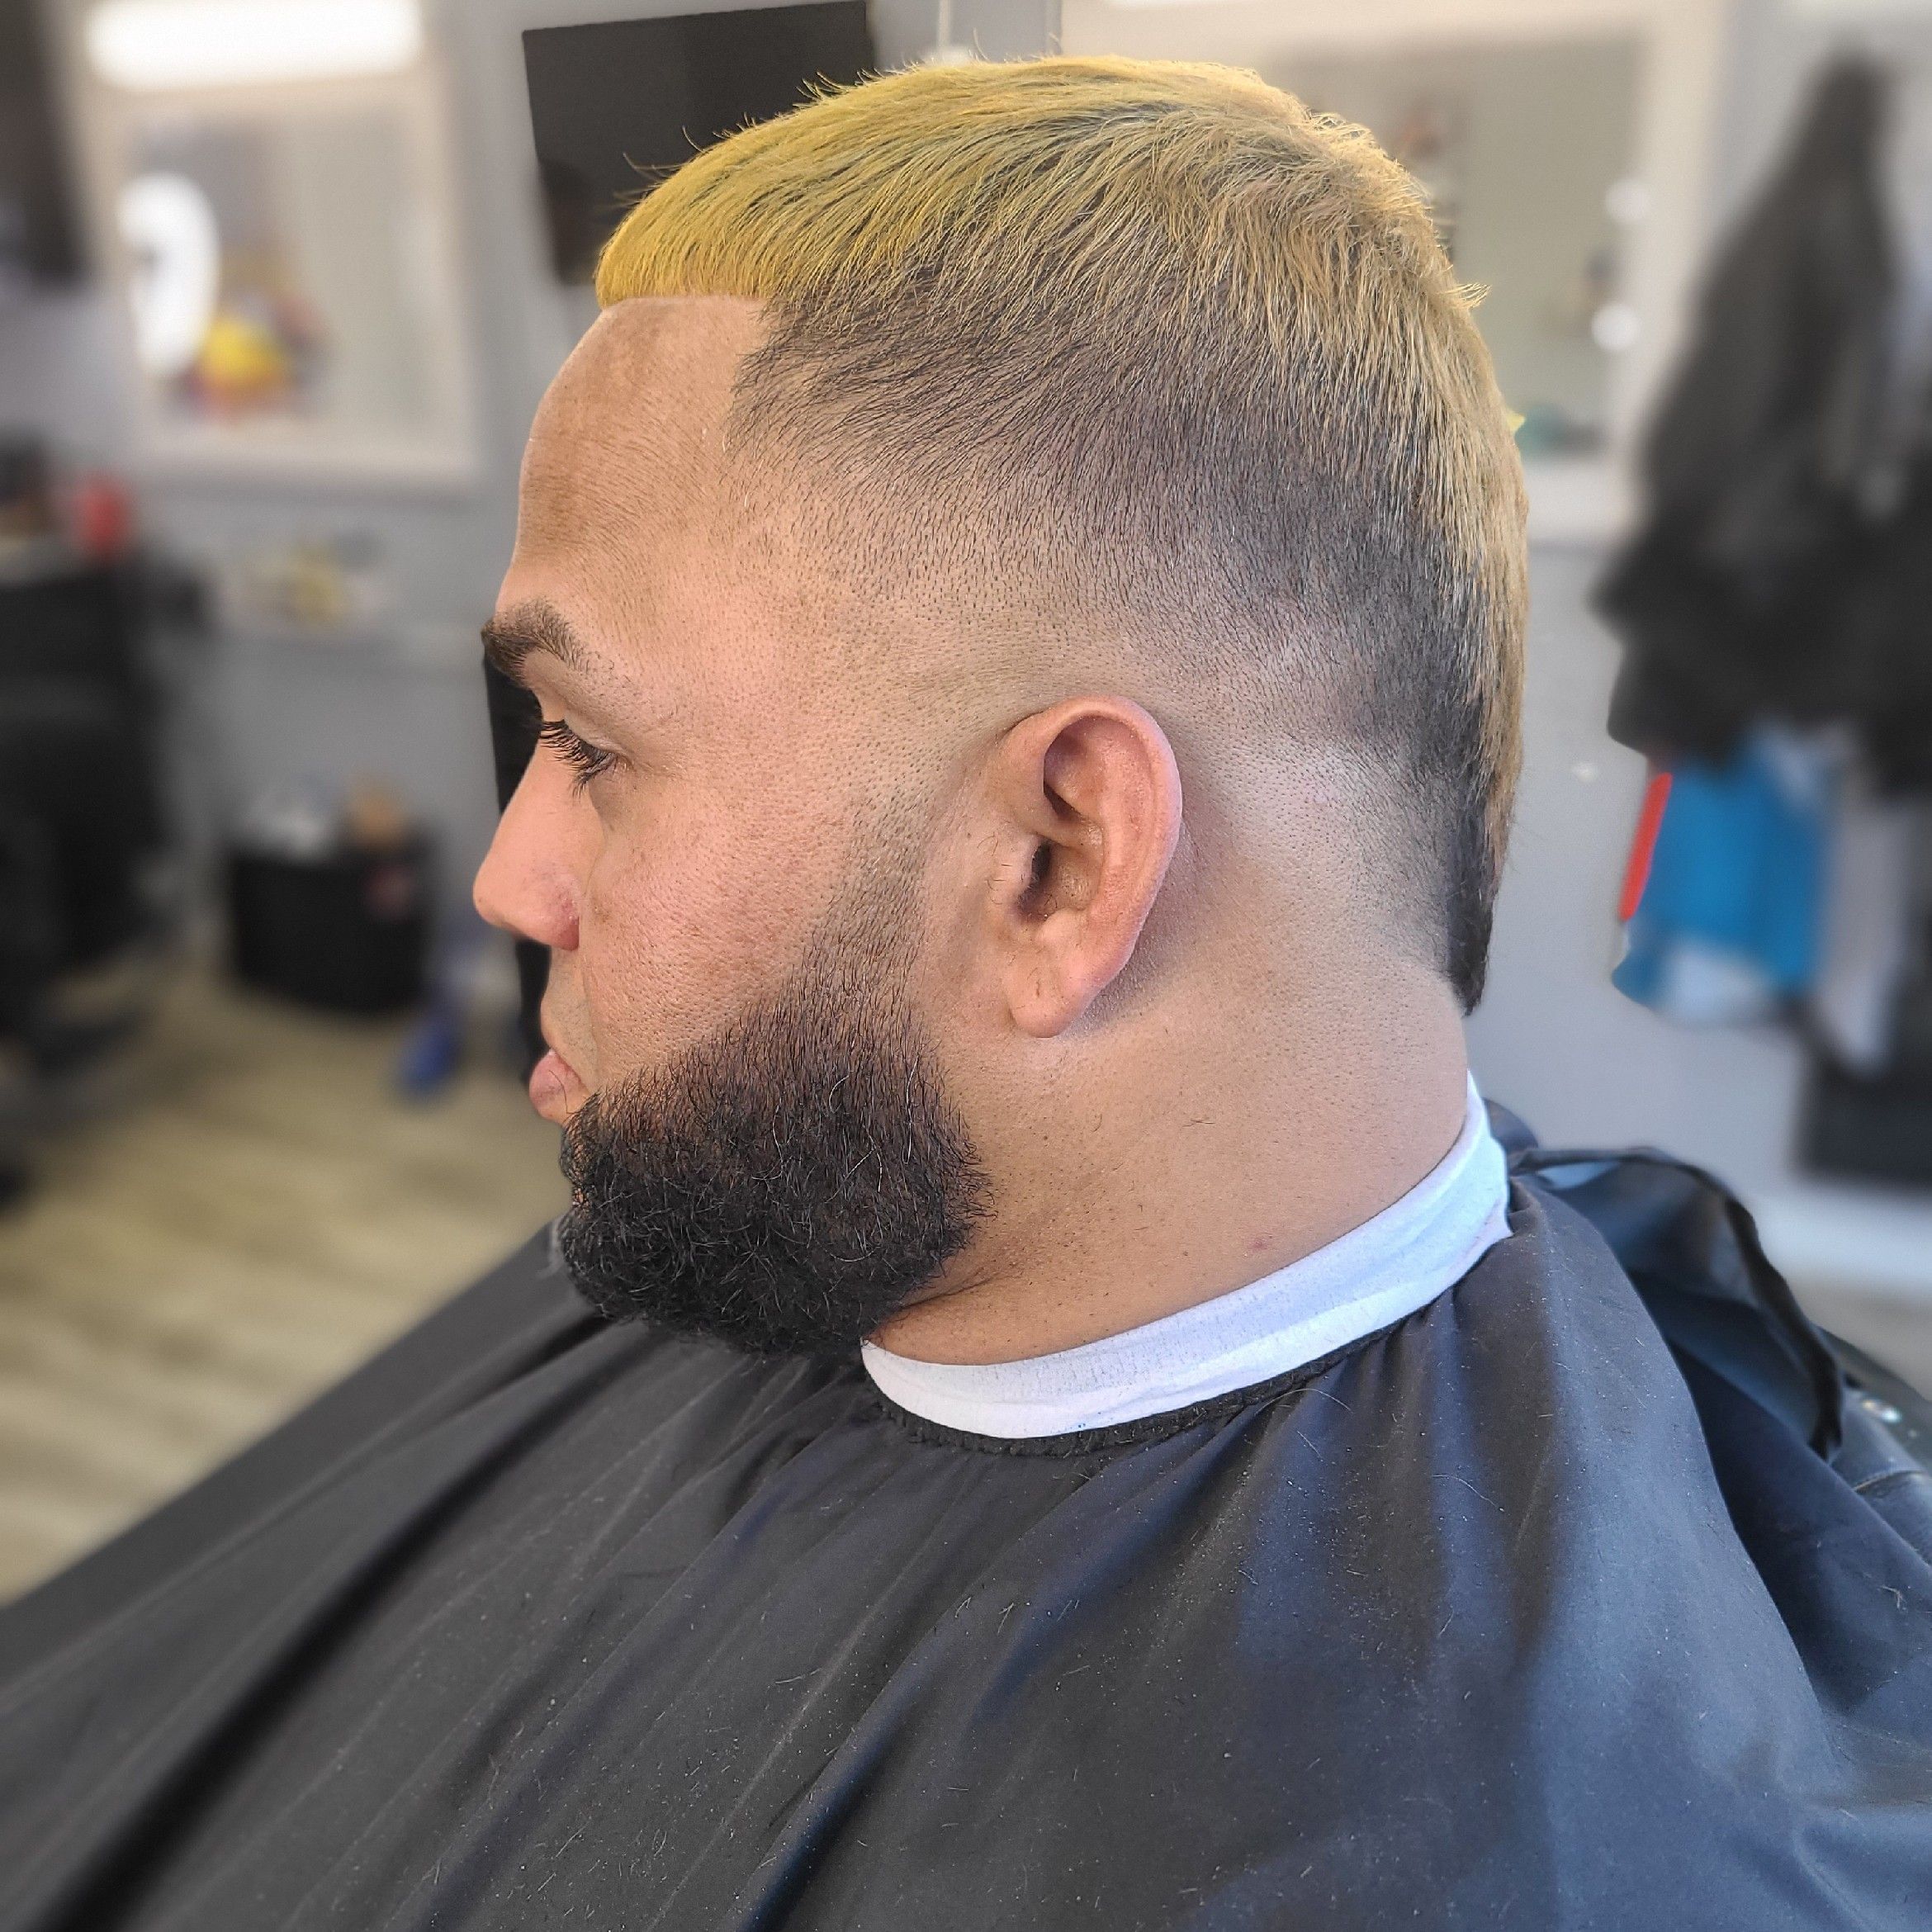 ADULT HAIRCUT WITH BEARD, MUSTACHE Or GOATEE portfolio